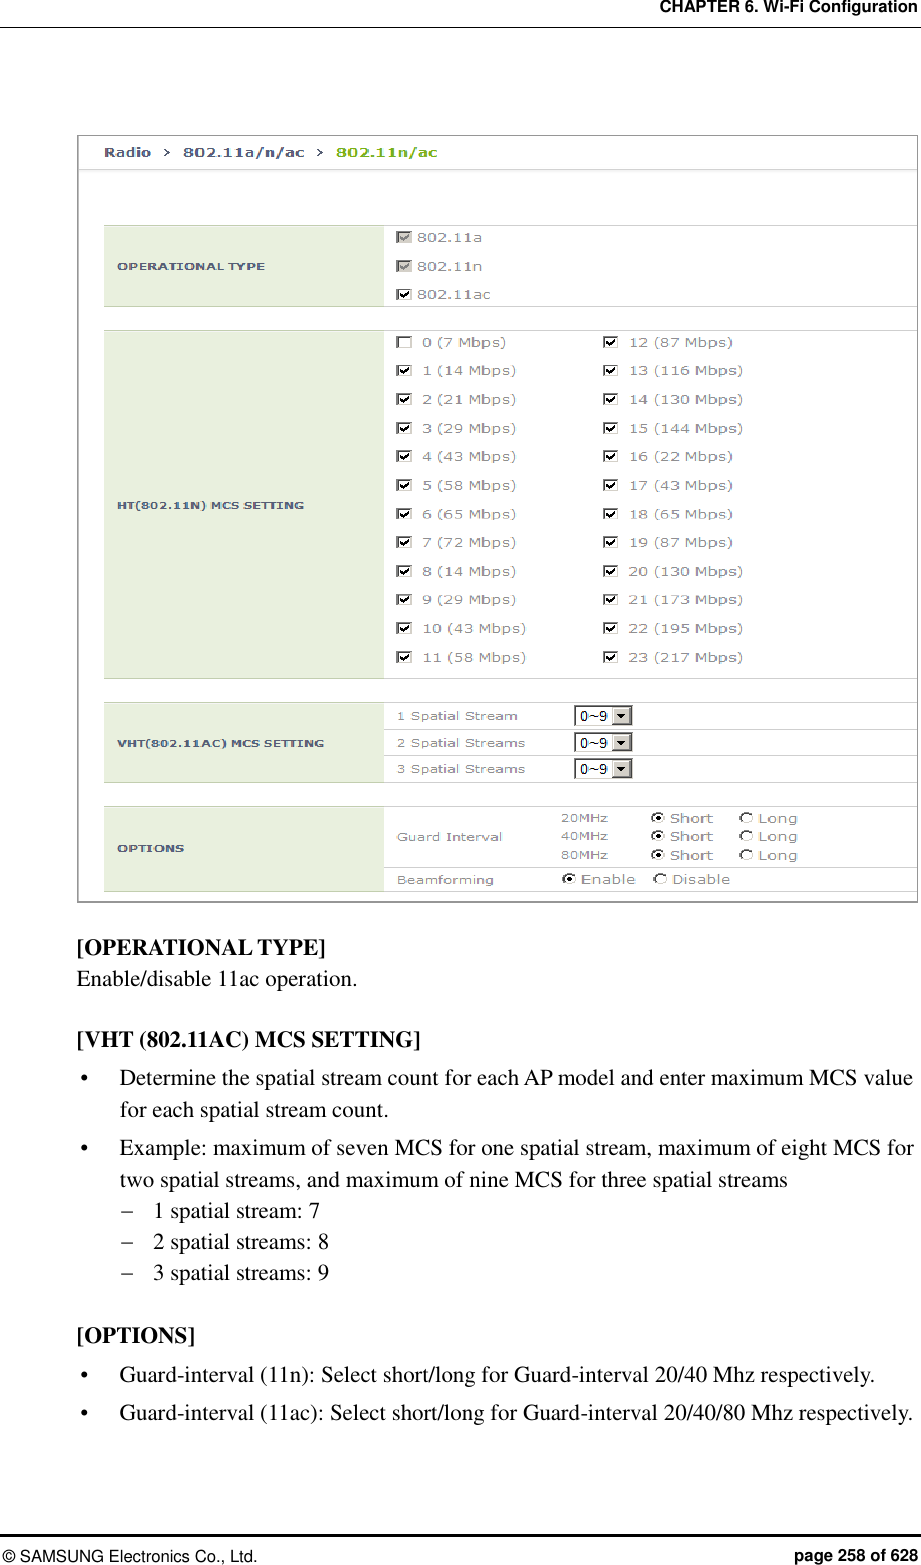 CHAPTER 6. Wi-Fi Configuration ©  SAMSUNG Electronics Co., Ltd.  page 258 of 628   [OPERATIONAL TYPE] Enable/disable 11ac operation.  [VHT (802.11AC) MCS SETTING]  Determine the spatial stream count for each AP model and enter maximum MCS value for each spatial stream count.  Example: maximum of seven MCS for one spatial stream, maximum of eight MCS for two spatial streams, and maximum of nine MCS for three spatial streams  1 spatial stream: 7  2 spatial streams: 8  3 spatial streams: 9  [OPTIONS]  Guard-interval (11n): Select short/long for Guard-interval 20/40 Mhz respectively.  Guard-interval (11ac): Select short/long for Guard-interval 20/40/80 Mhz respectively.  